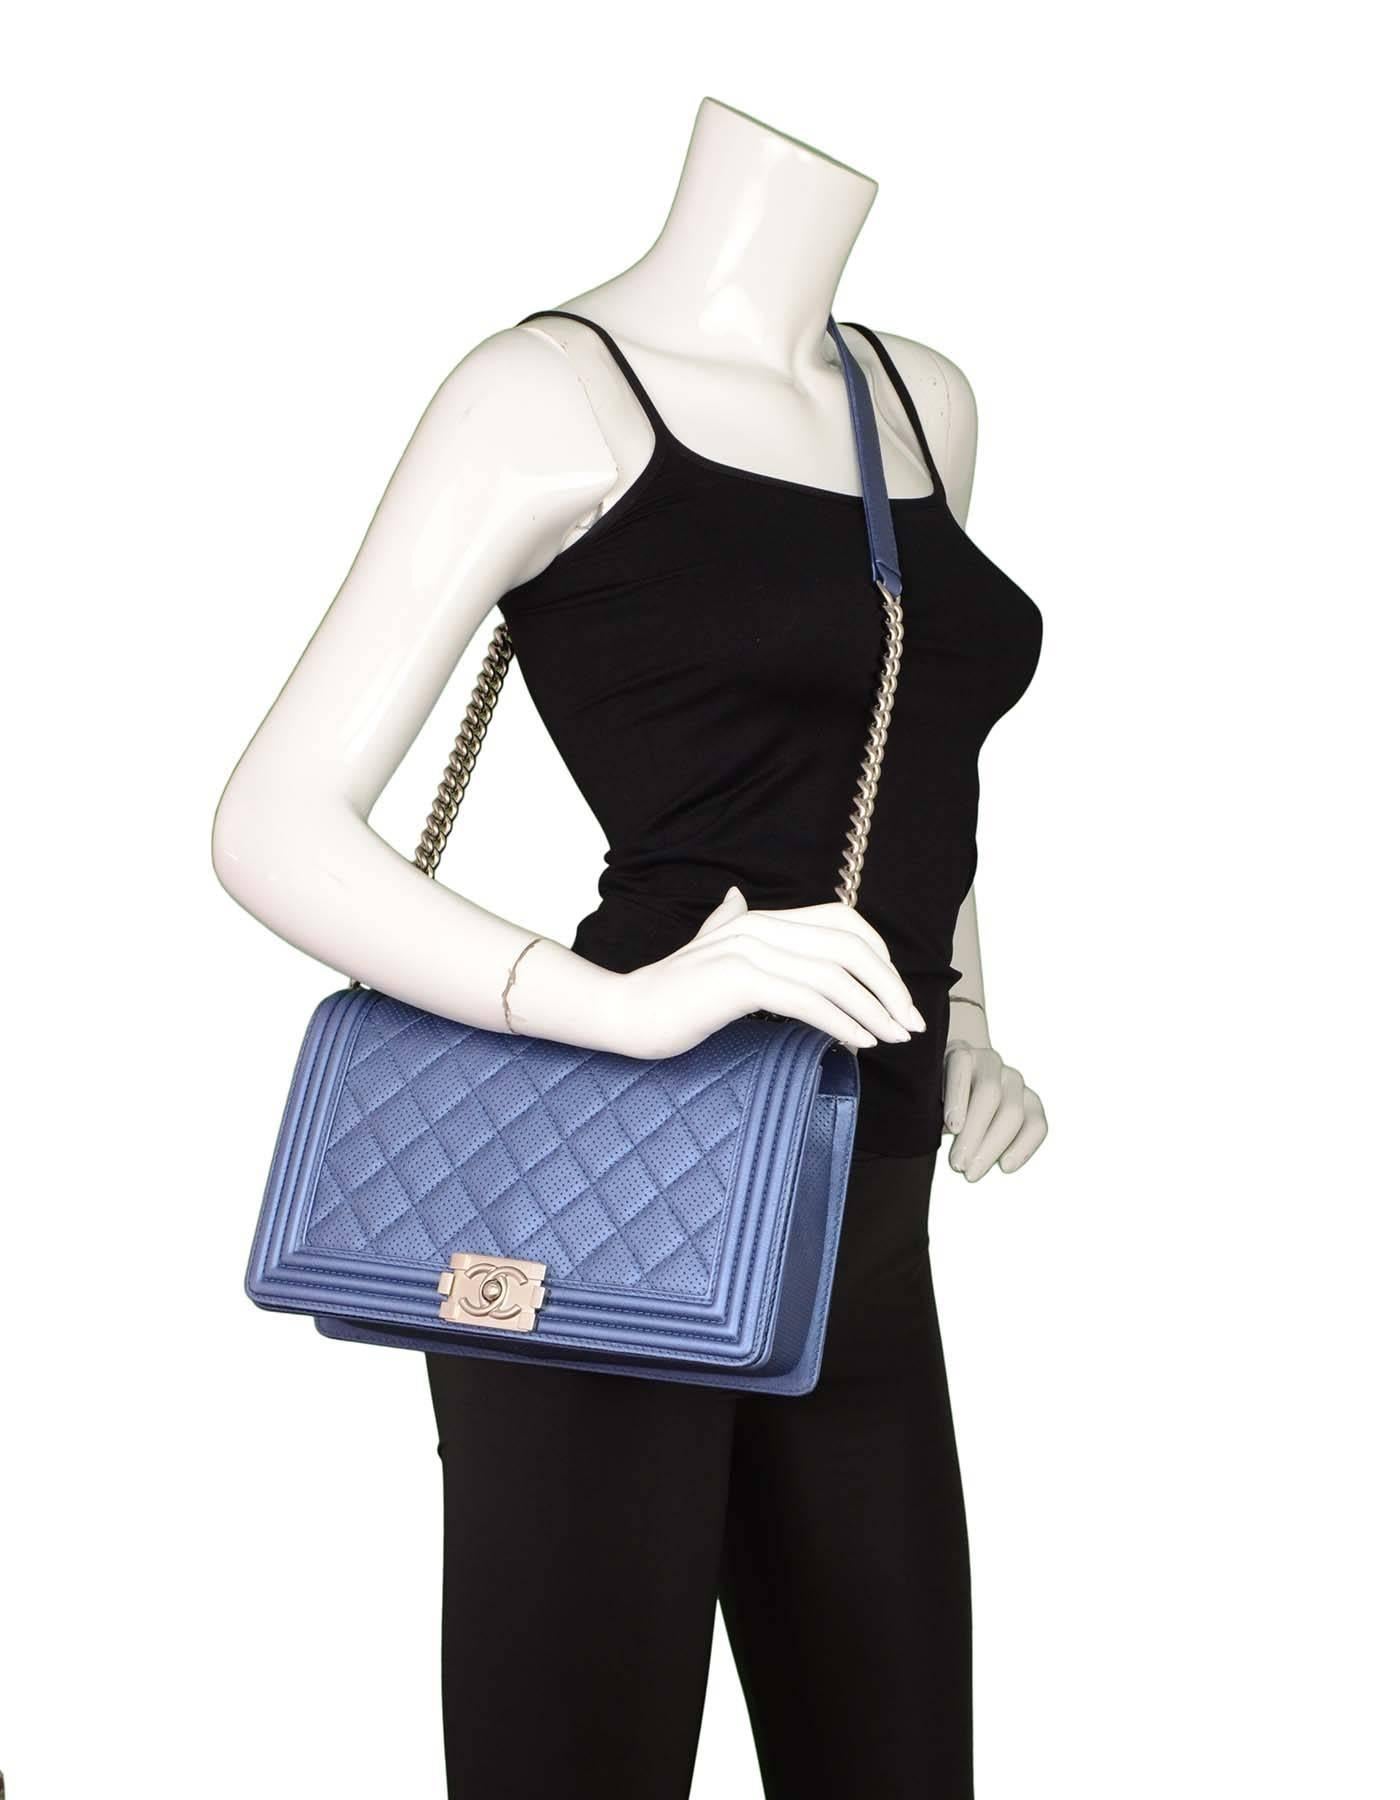 Chanel Metallic Blue Perforated Quilted New Medium Boy Bag SHW rt. $5, 200 3